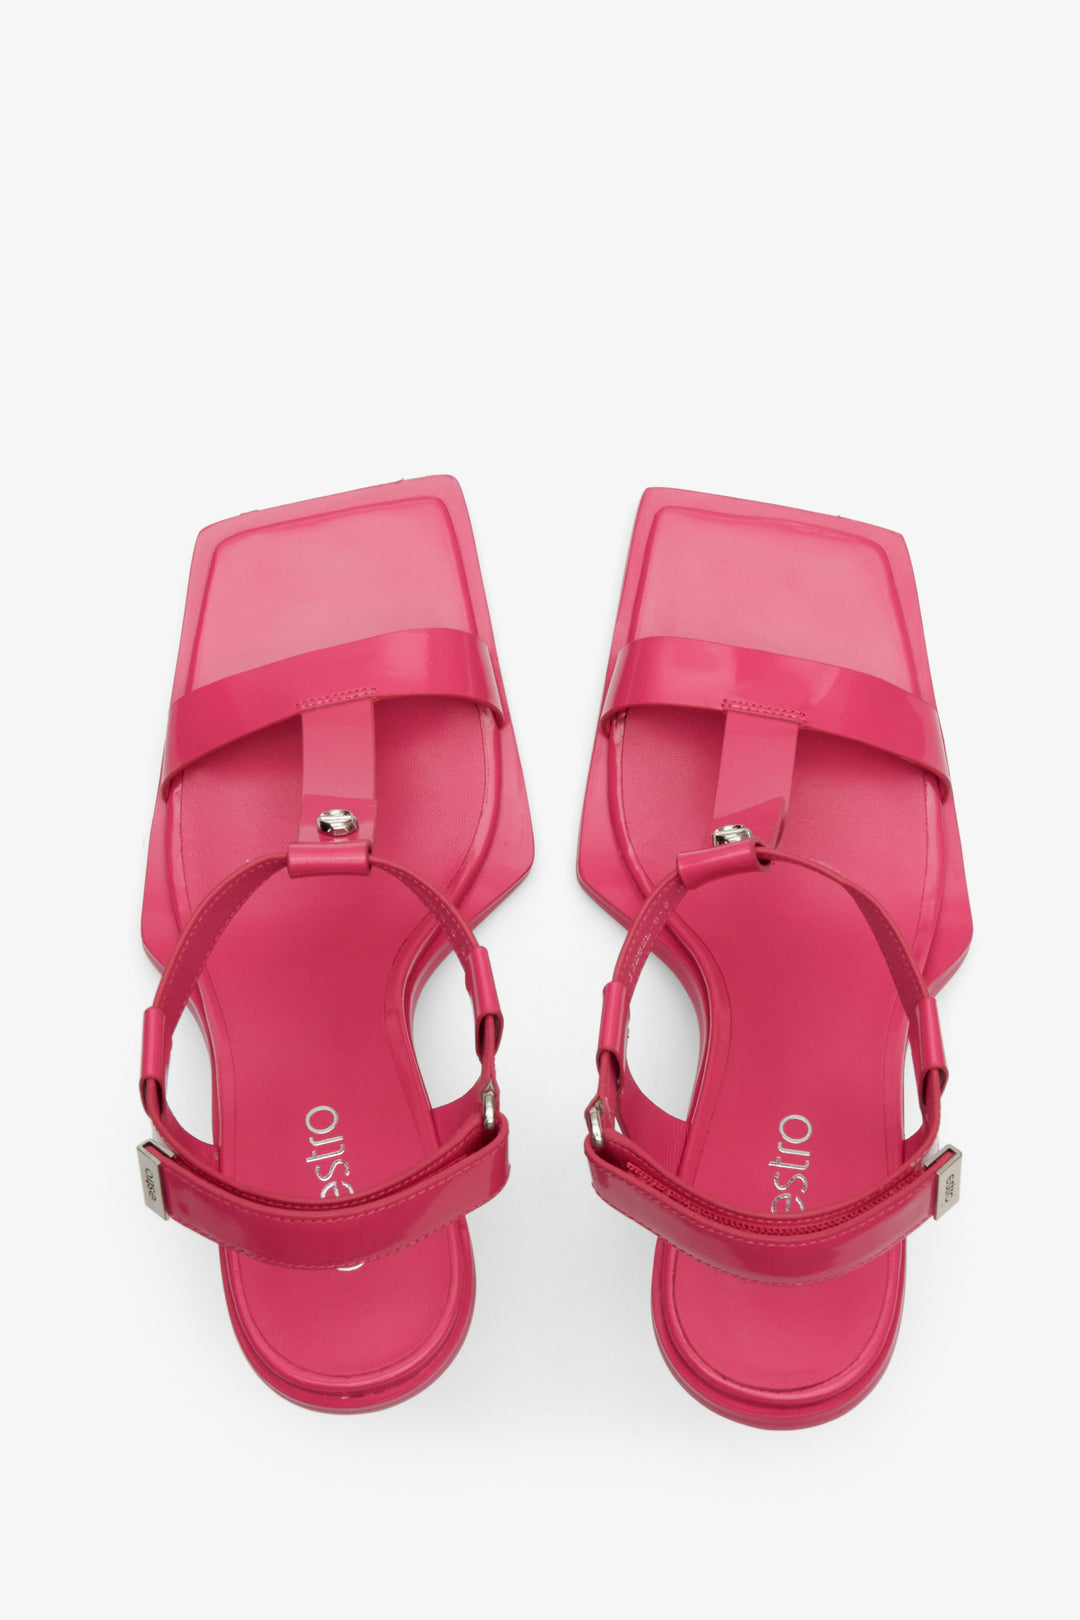 Stylish pink t-bar strappy sandals, Estro brand - presentation from above.